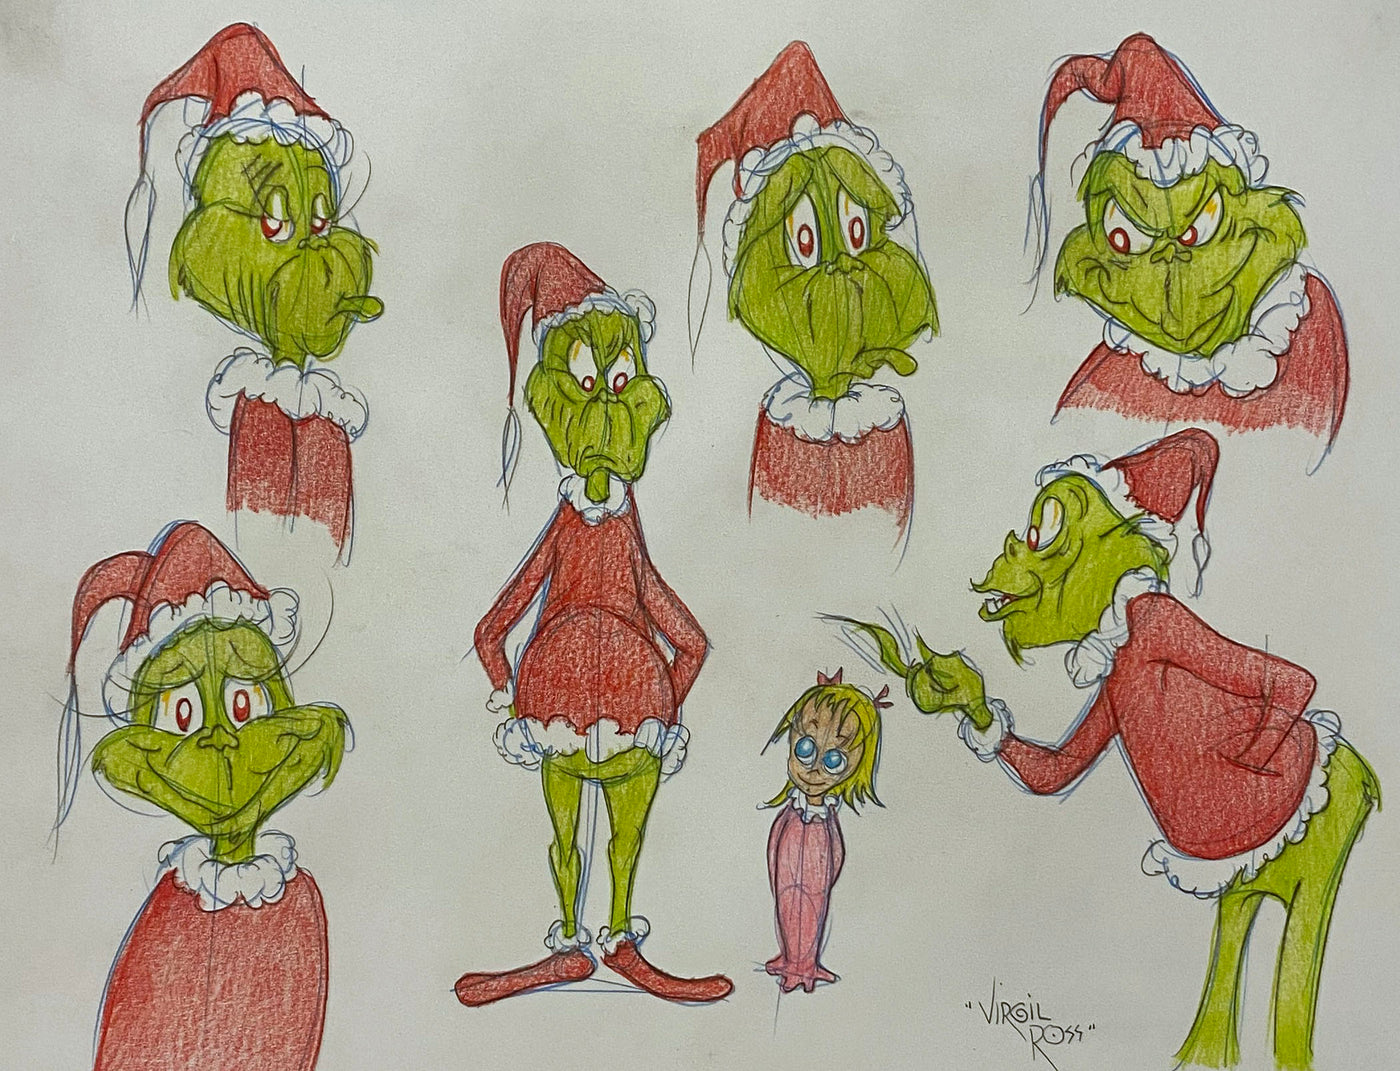 Original Warner Brothers Virgil Ross Model Sheet Animation Drawing featuring The Grinch and Cindy Lou Who